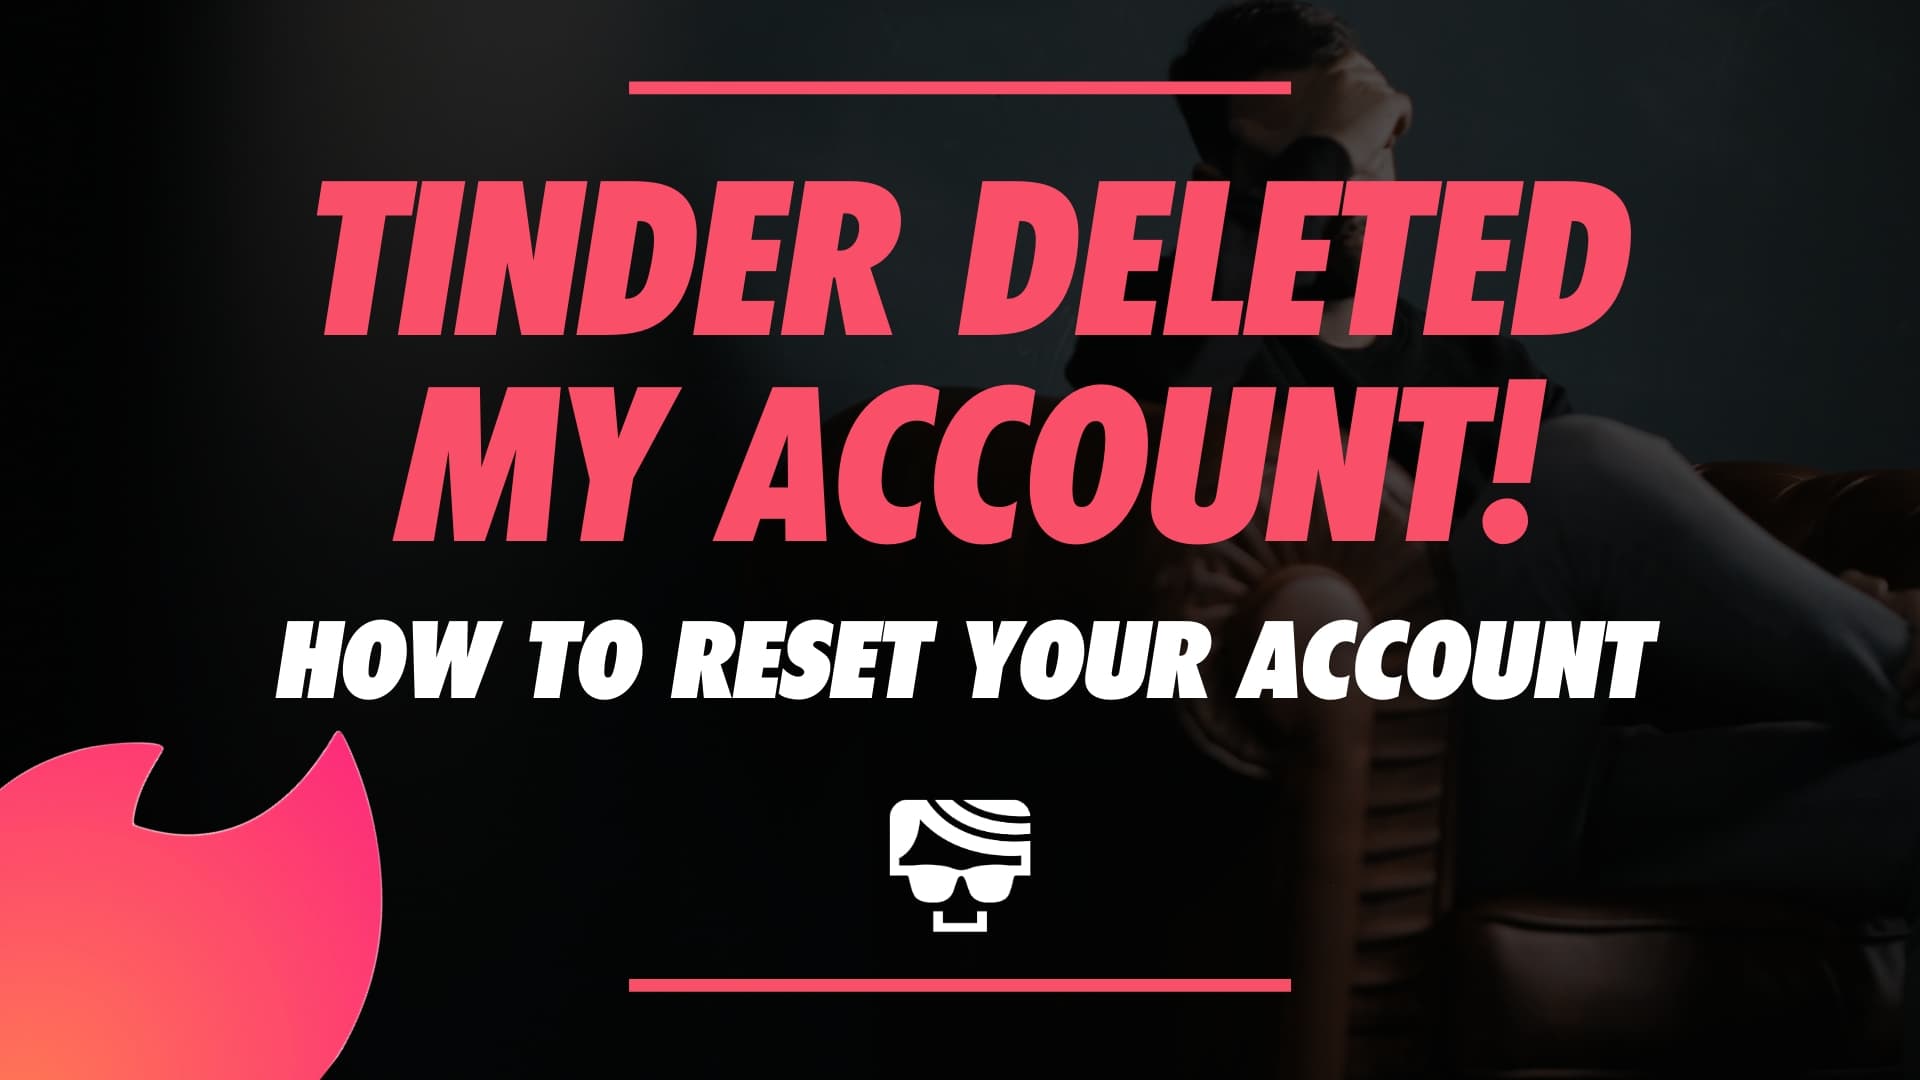 Tinder Deleted My Account! How To Reset To Get Around Tinder Ban 2022